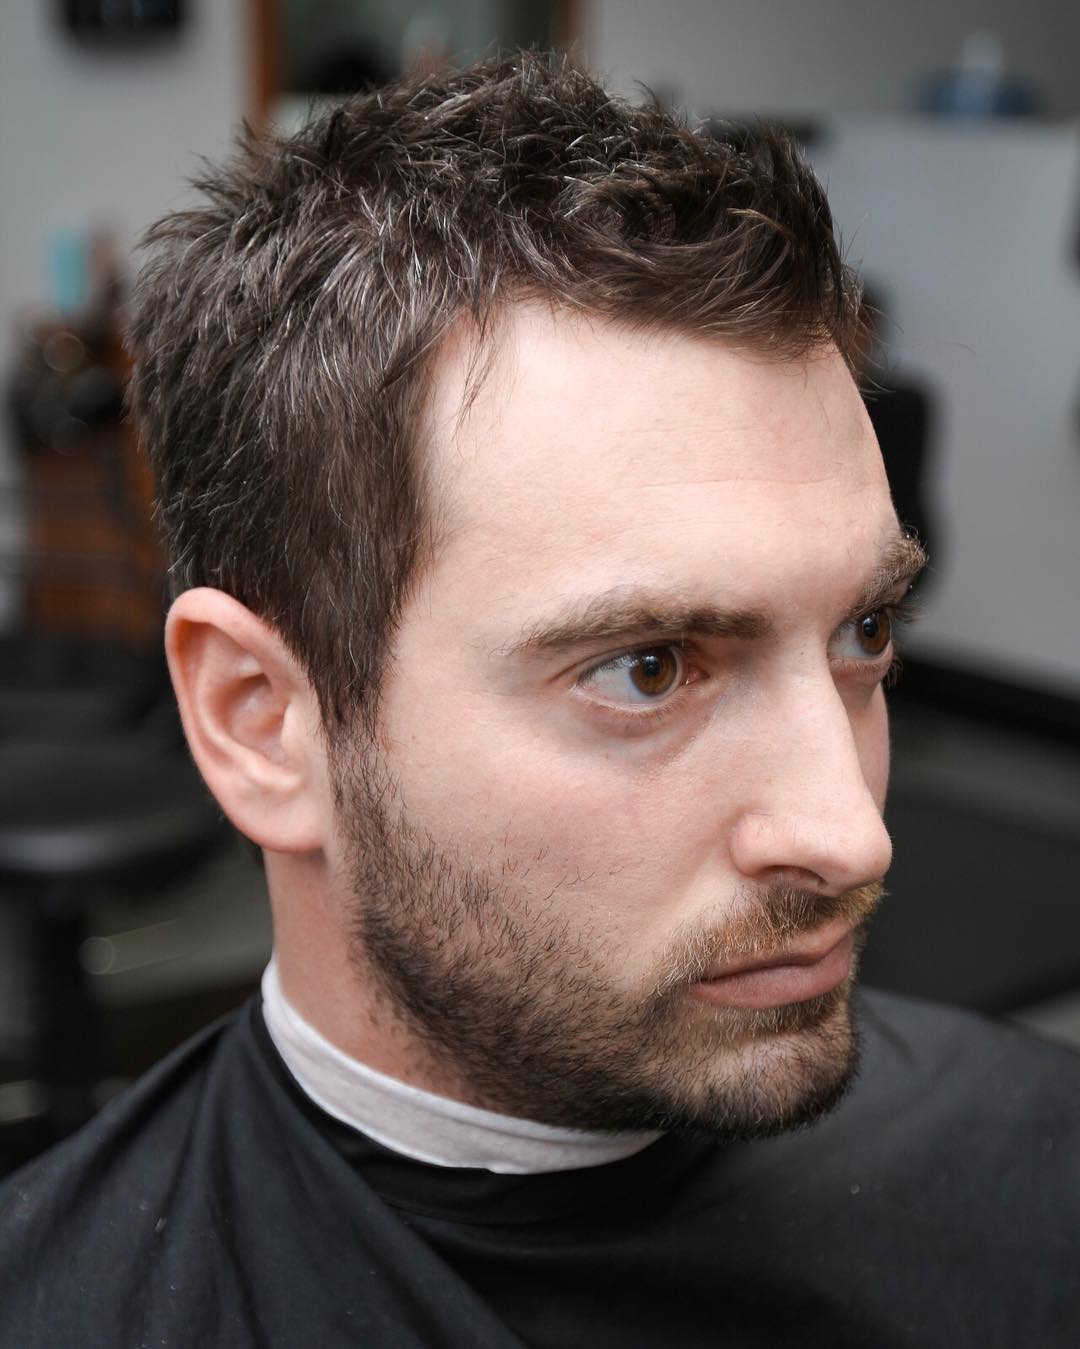 Top 5 Short Haircuts For Men - Your Average Guy